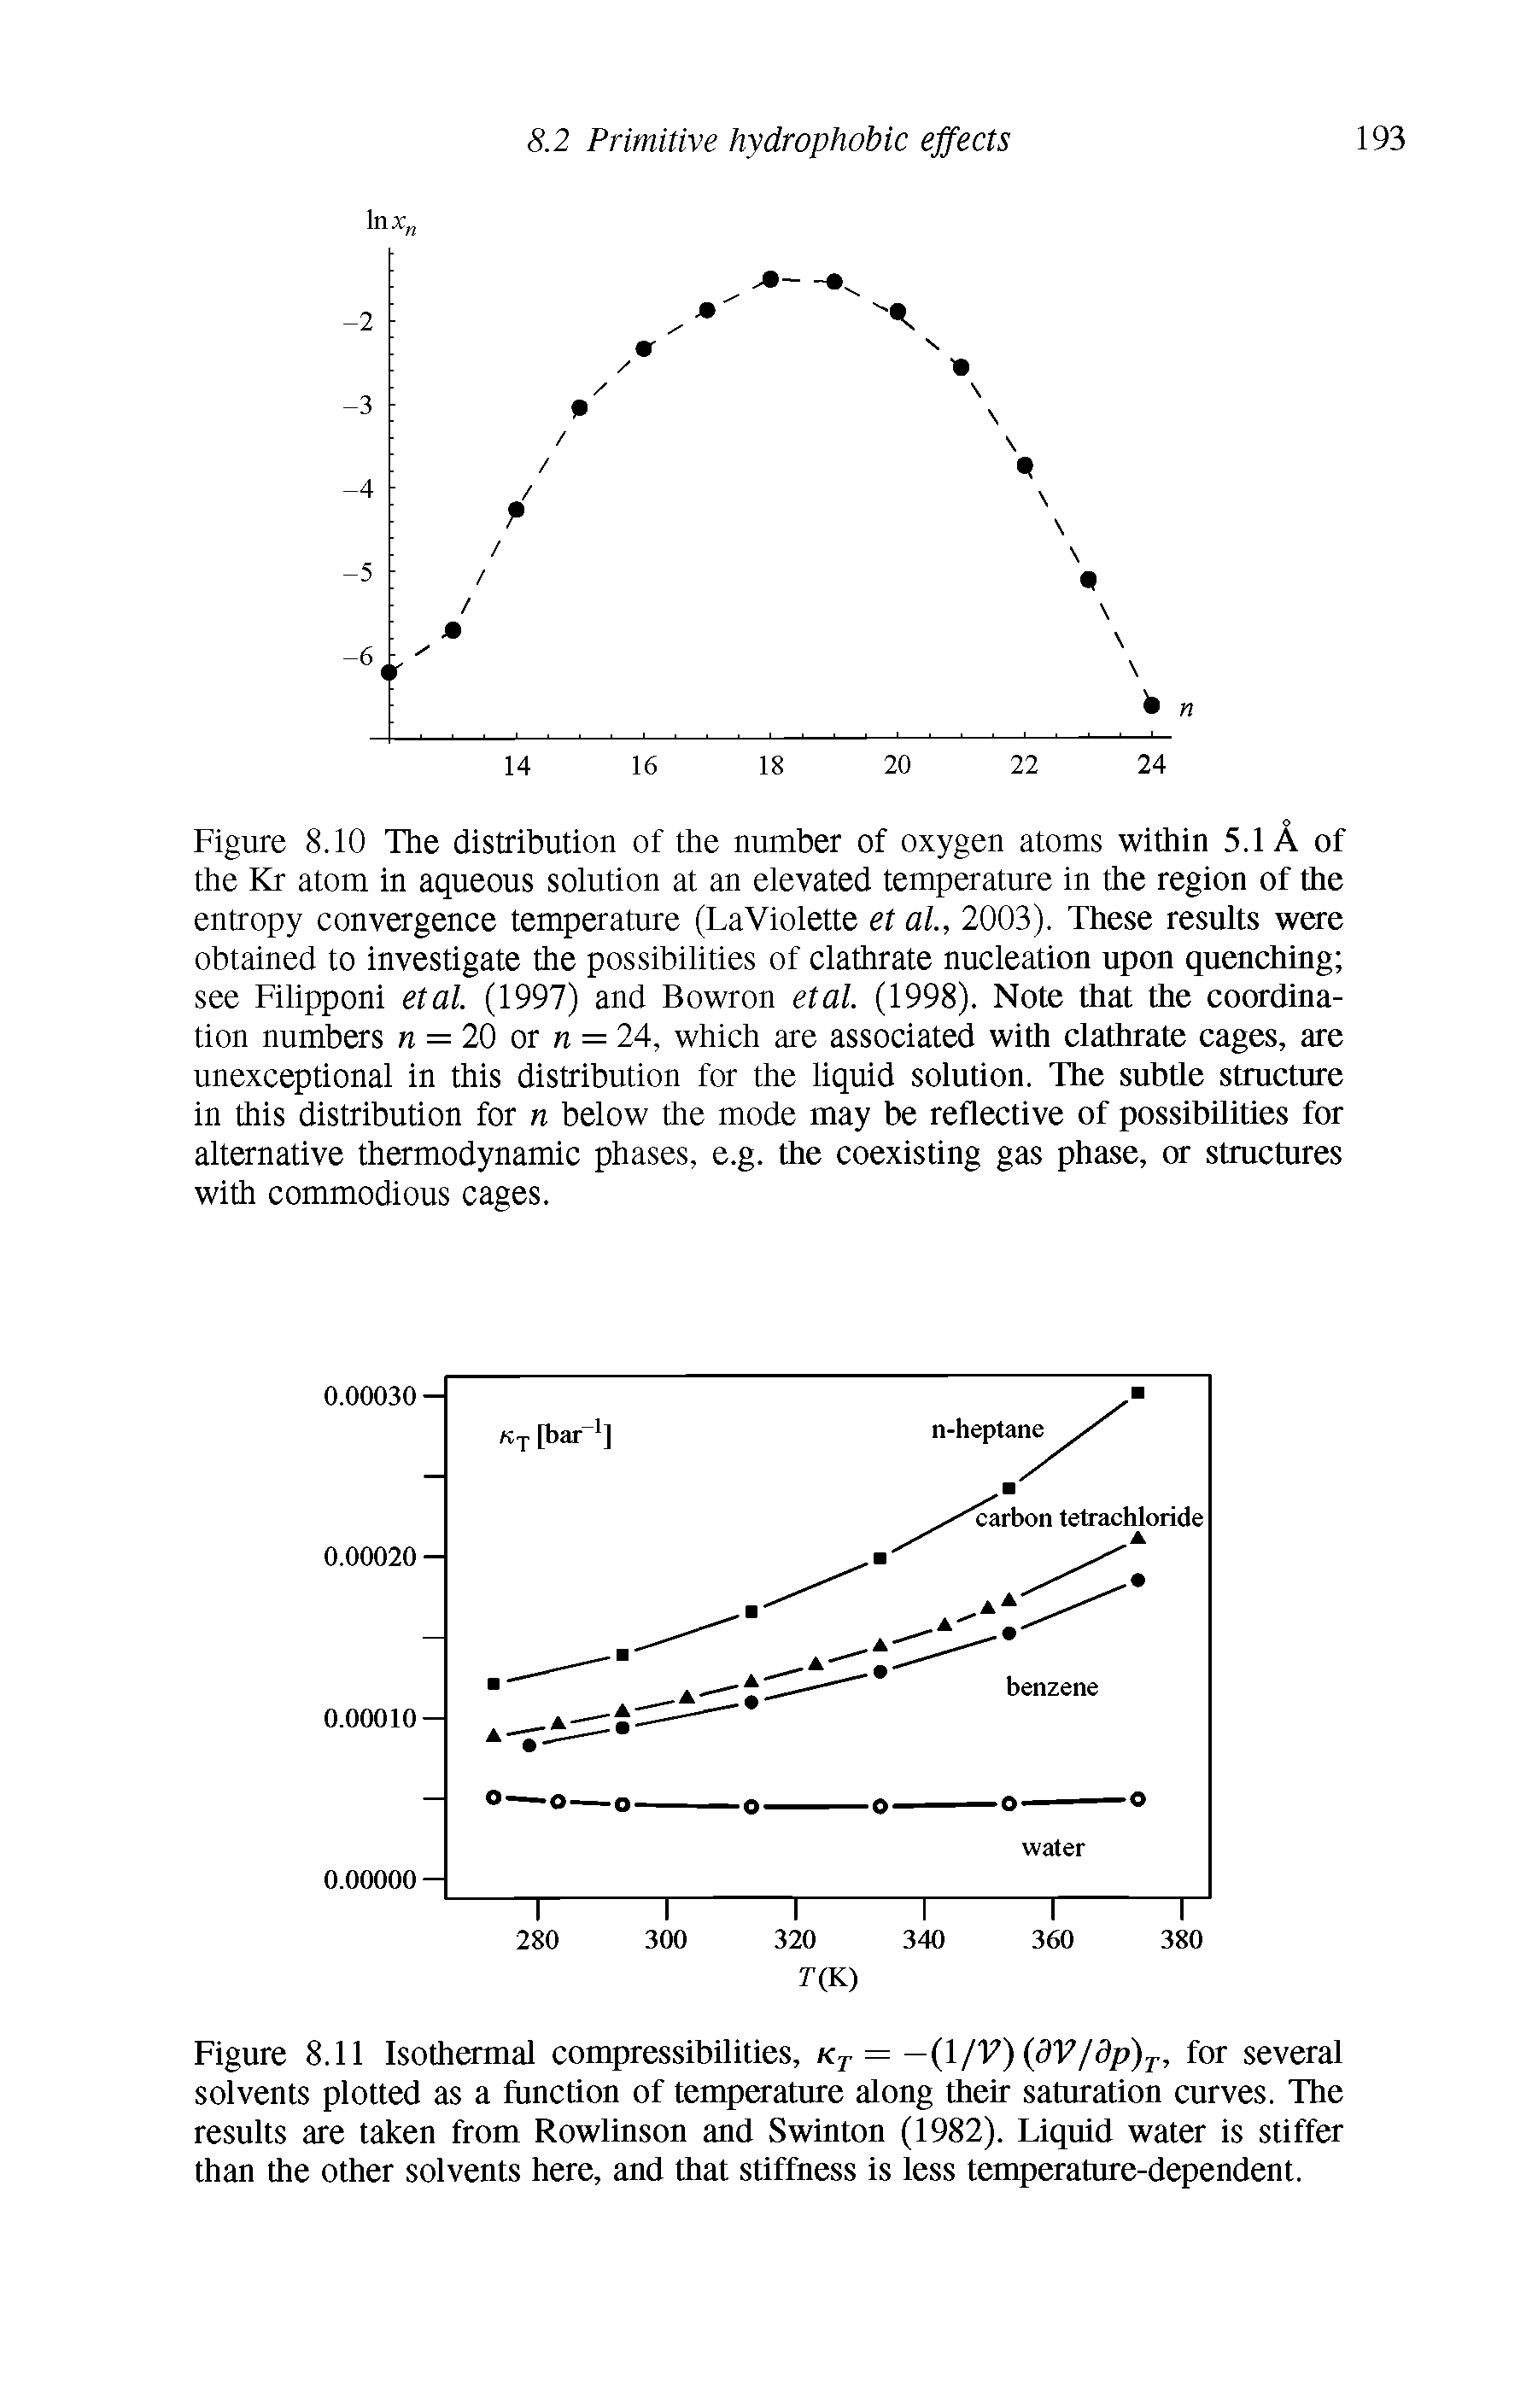 Figure 8.10 The distribution of the number of oxygen atoms within 5.1 A of the Kr atom in aqueous solution at an elevated temperature in the region of the entropy convergence temperature (LaViolette et al, 2003). These results were obtained to investigate the possibilities of clathrate nucleation upon quenching see Filipponi etal. (1997) and Bowron etal. (1998). Note that the coordination numbers n = 20 or n = 24, which are associated with clathrate cages, are unexceptional in this distribution for the liquid solution. The subtle structure in this distribution for n below the mode may be reflective of possibilities for alternative thermodynamic phases, e.g. the coexisting gas phase, or structures with commodious cages.